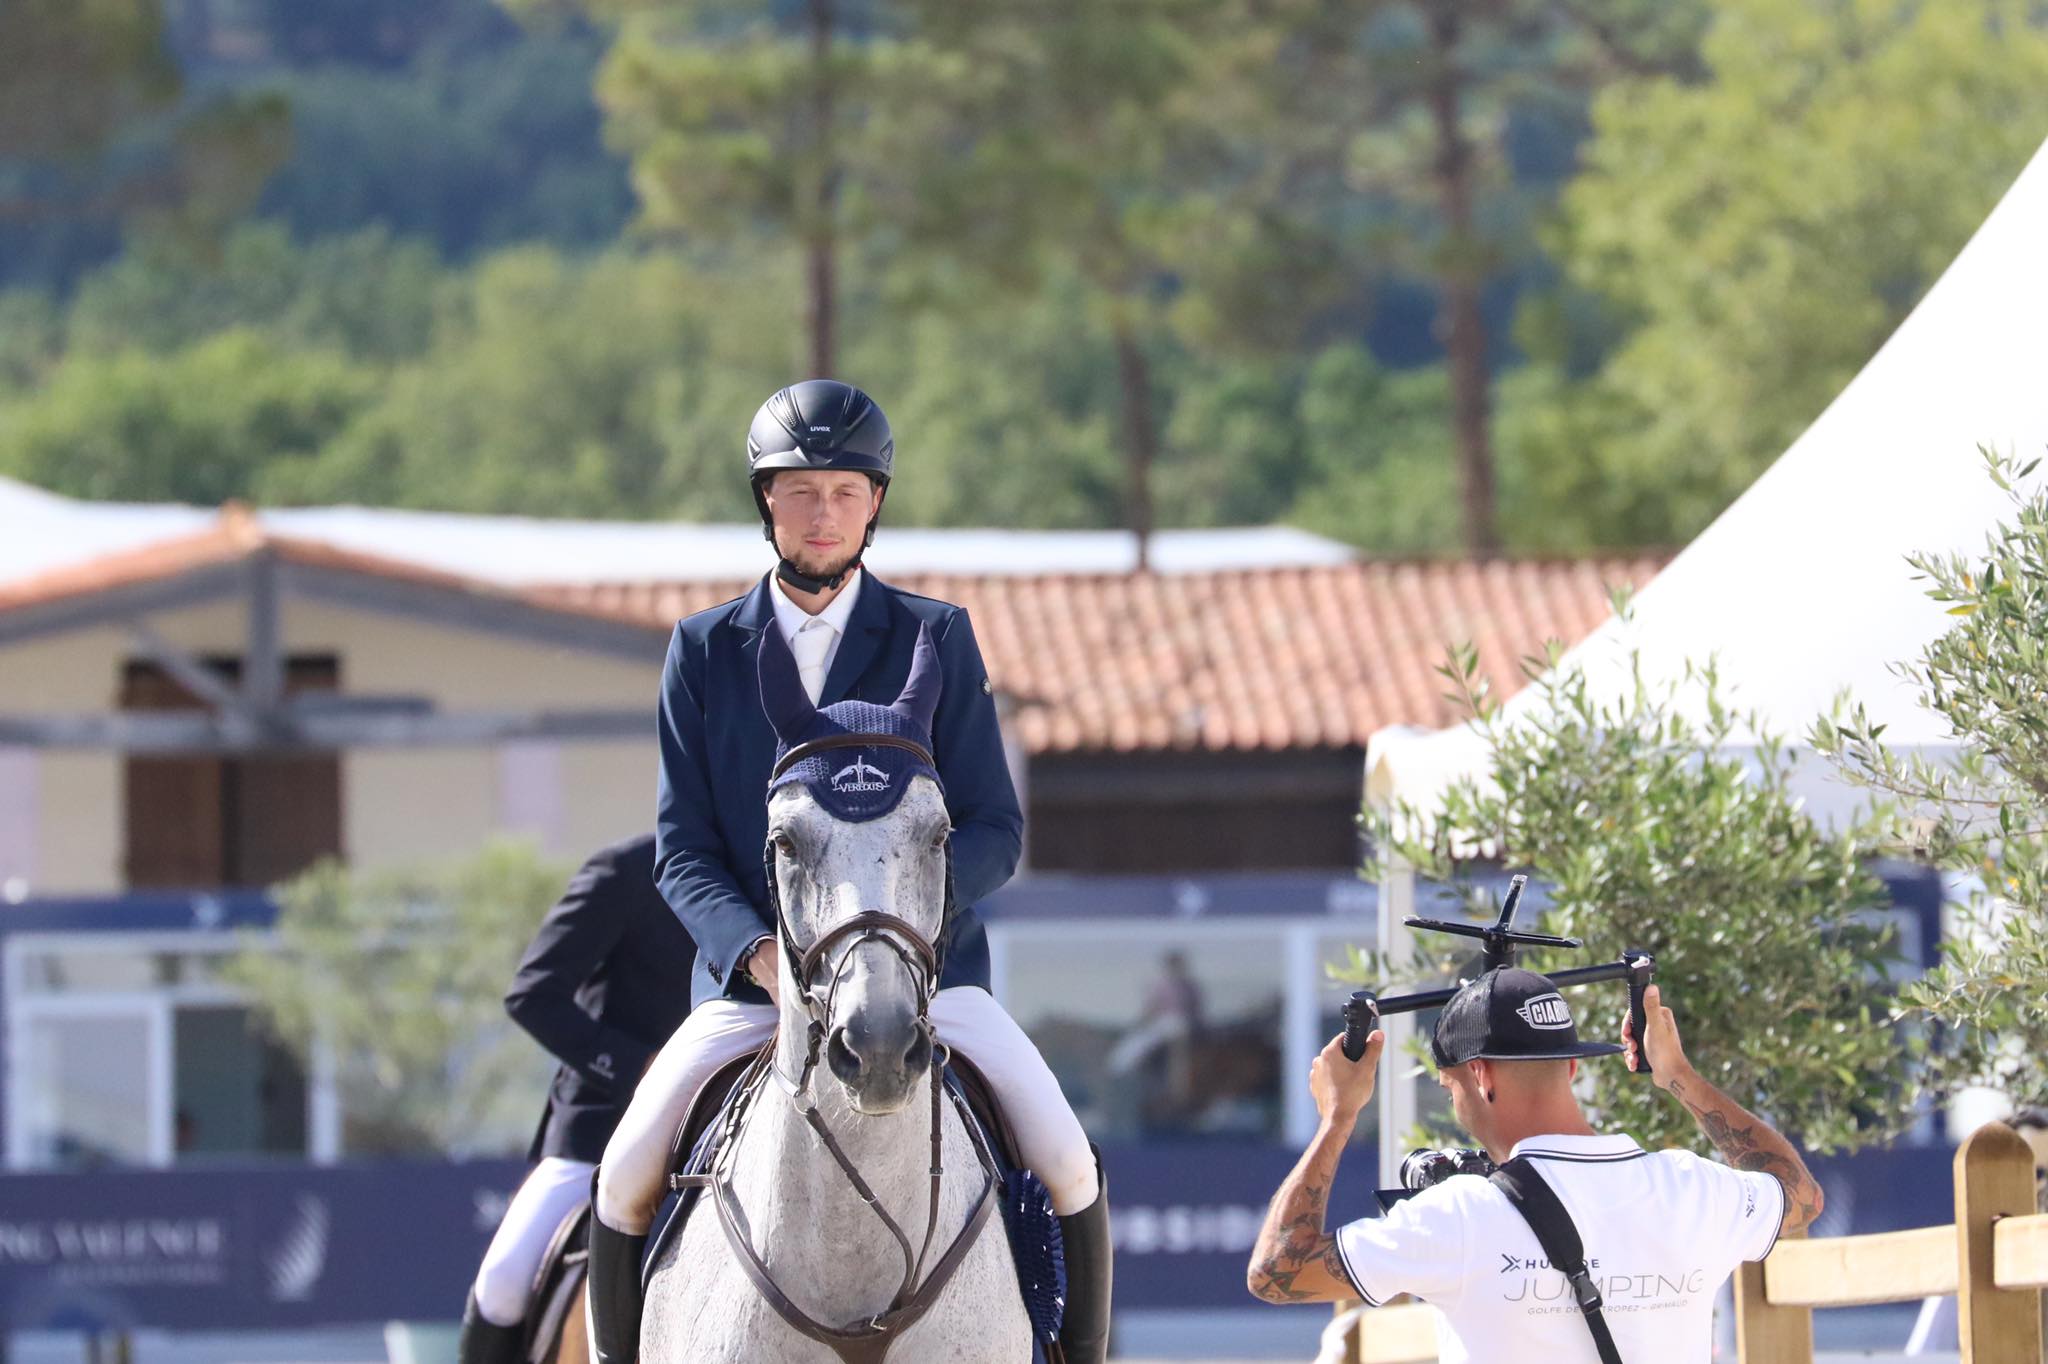 Martin Fuchs collects ranking points in CSI5* Hubside